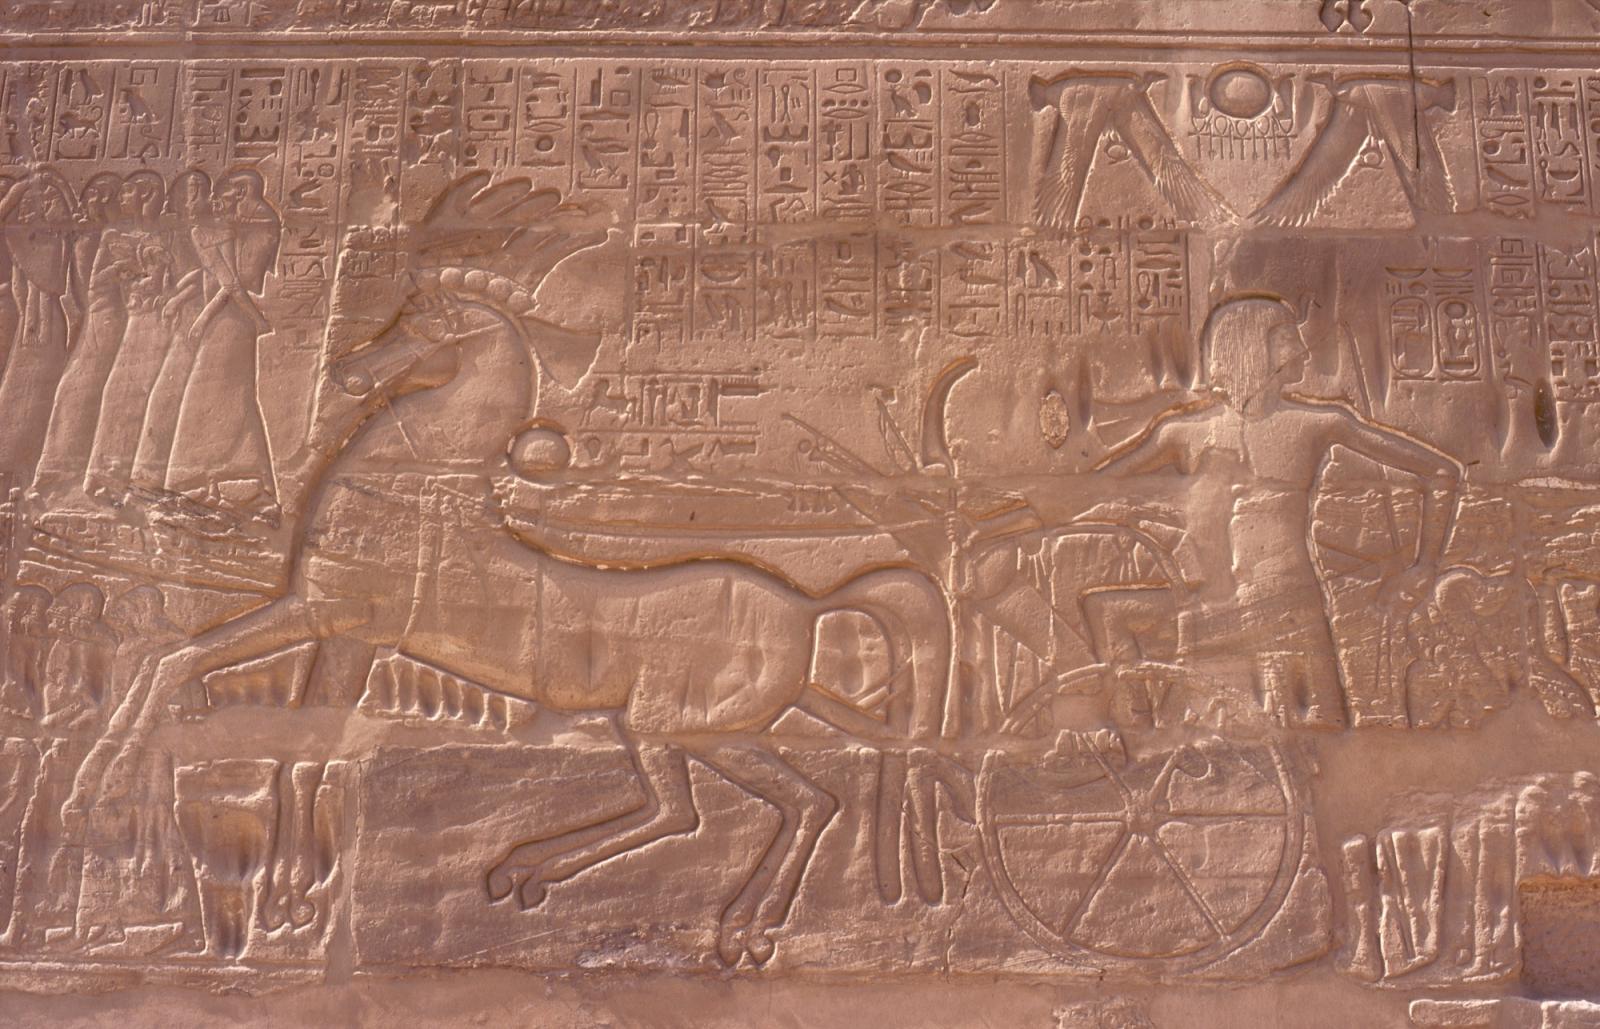 Sety I mounting chariot and leading captives on exterior wall of great hypostyle hall.